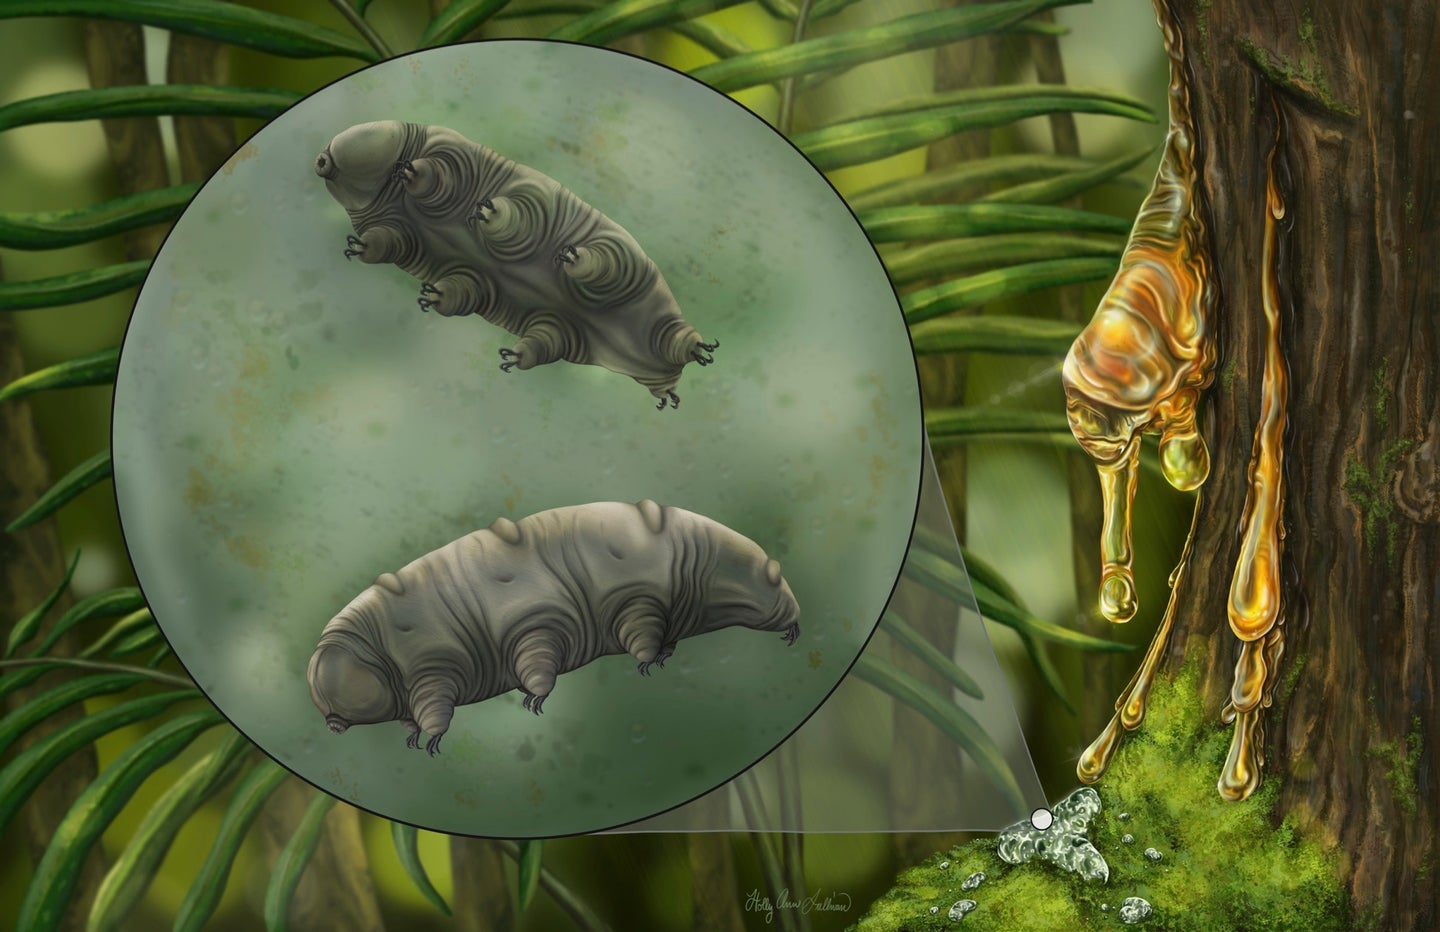 Tardigrades, when alive, are extremely resilient and hard to kill, but they don’t show up in the fossil record very often.